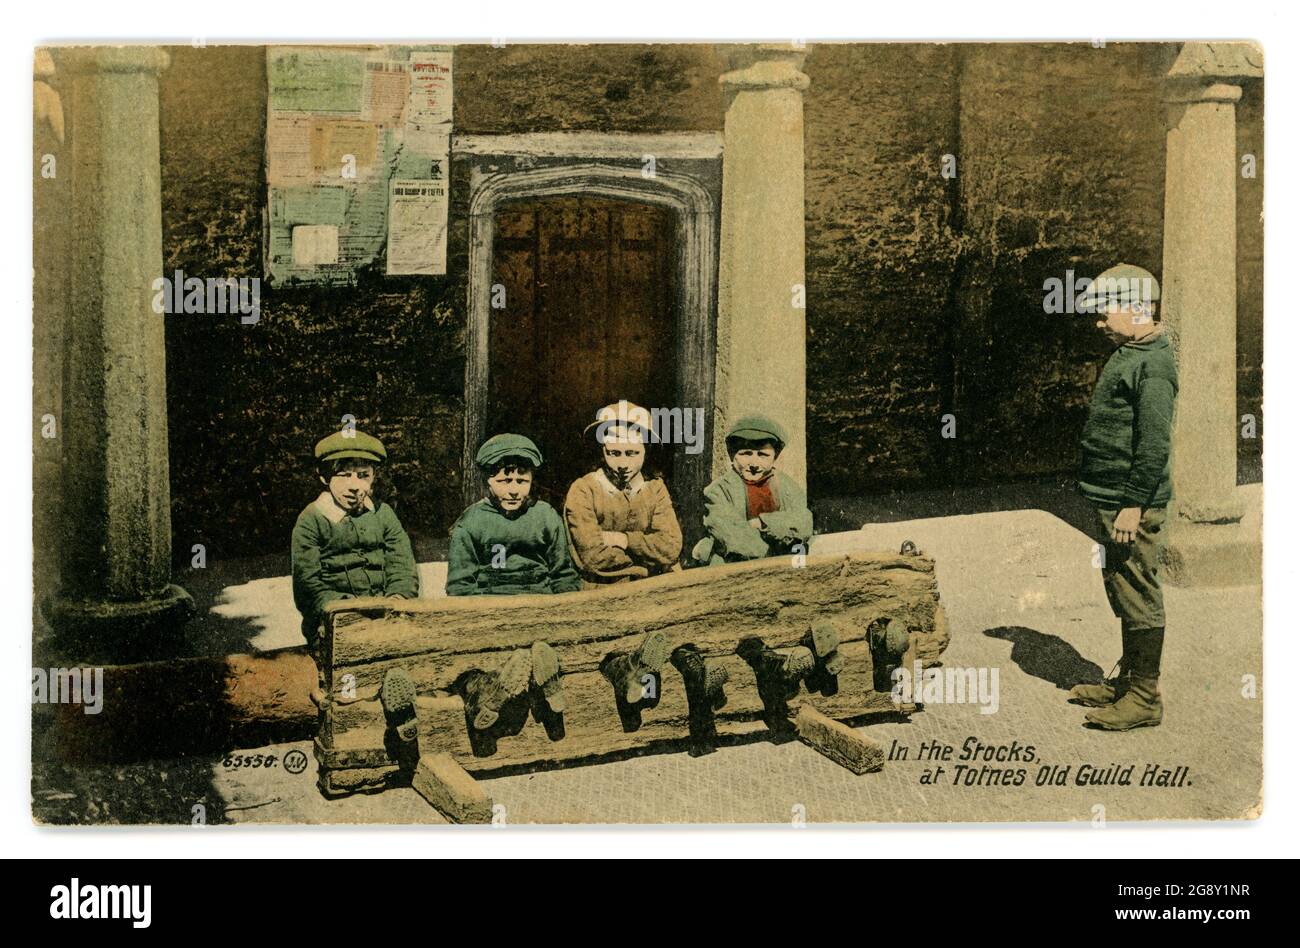 Early 1900's tinted greetings card of young boys sitting in the stocks, an antiquated form of punishment through humiliation of the criminal, though posed for this photo. Totnes Old Guild Hall, Devon, U.K. posted 1913 Stock Photo